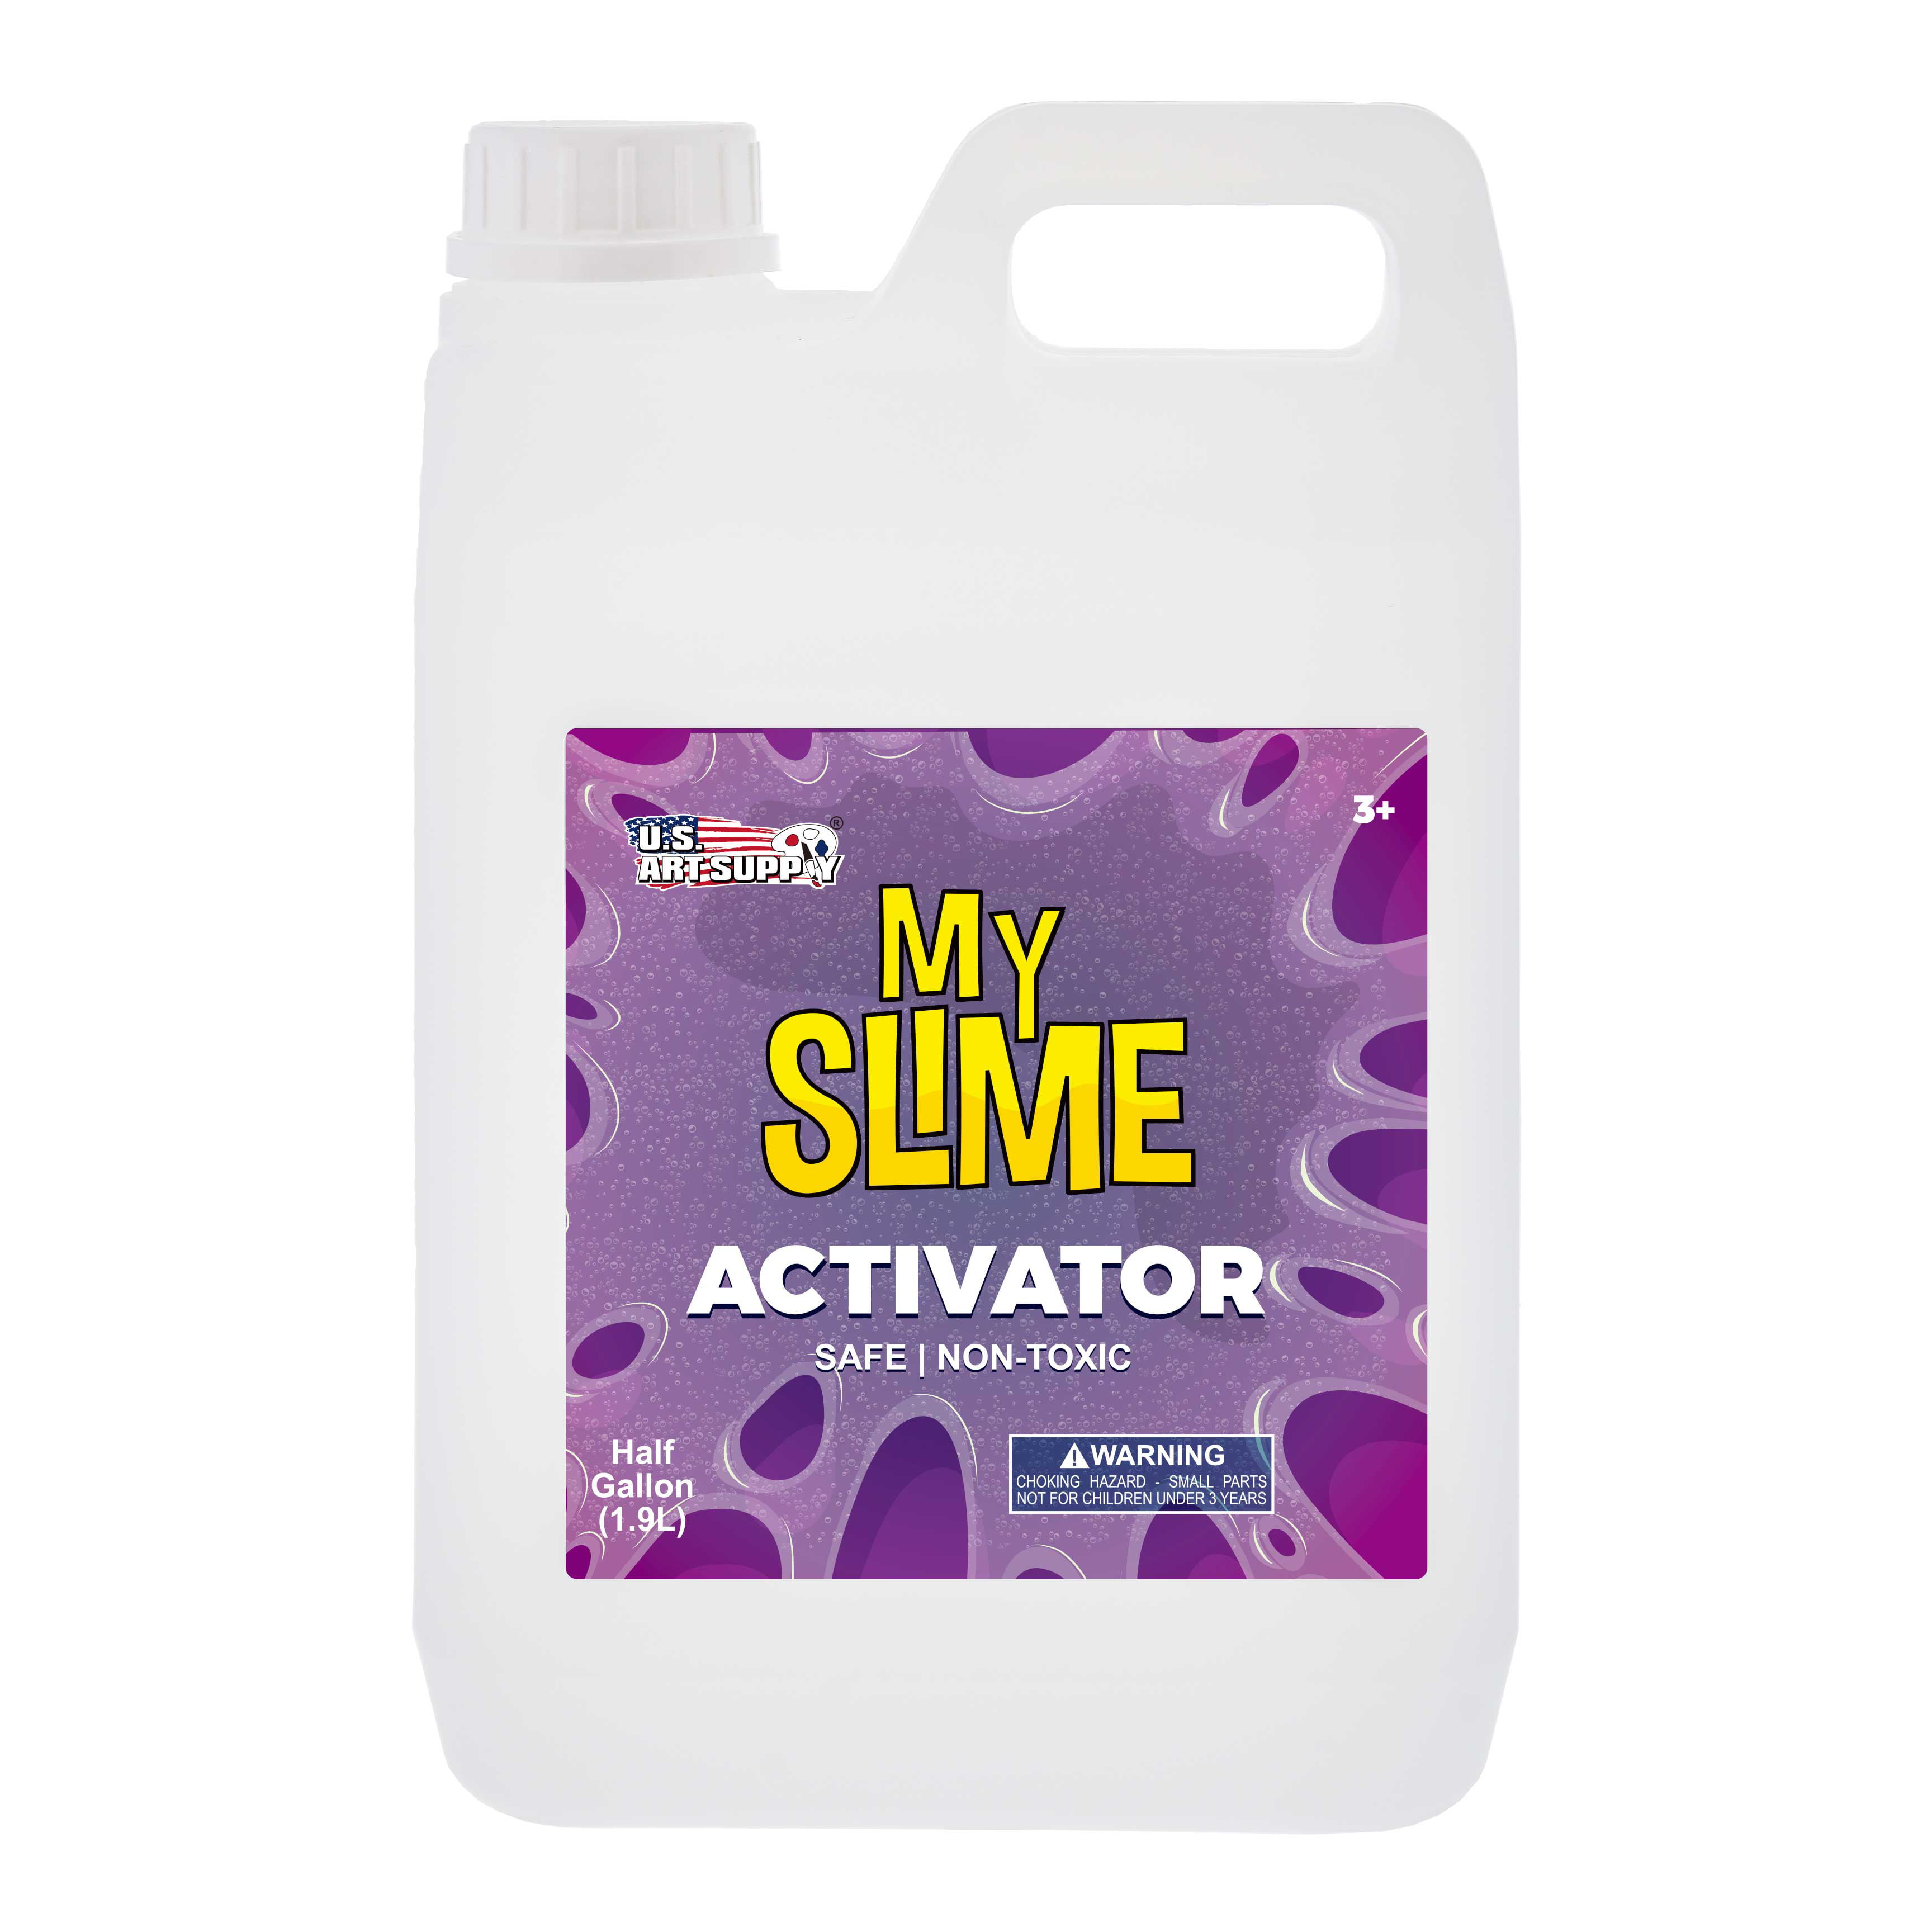 My Slime Activator Solution Half Gallon Make Your Own Slime Just Add Glue Kid Safe Non Toxic Replaces Borax Walmartcom